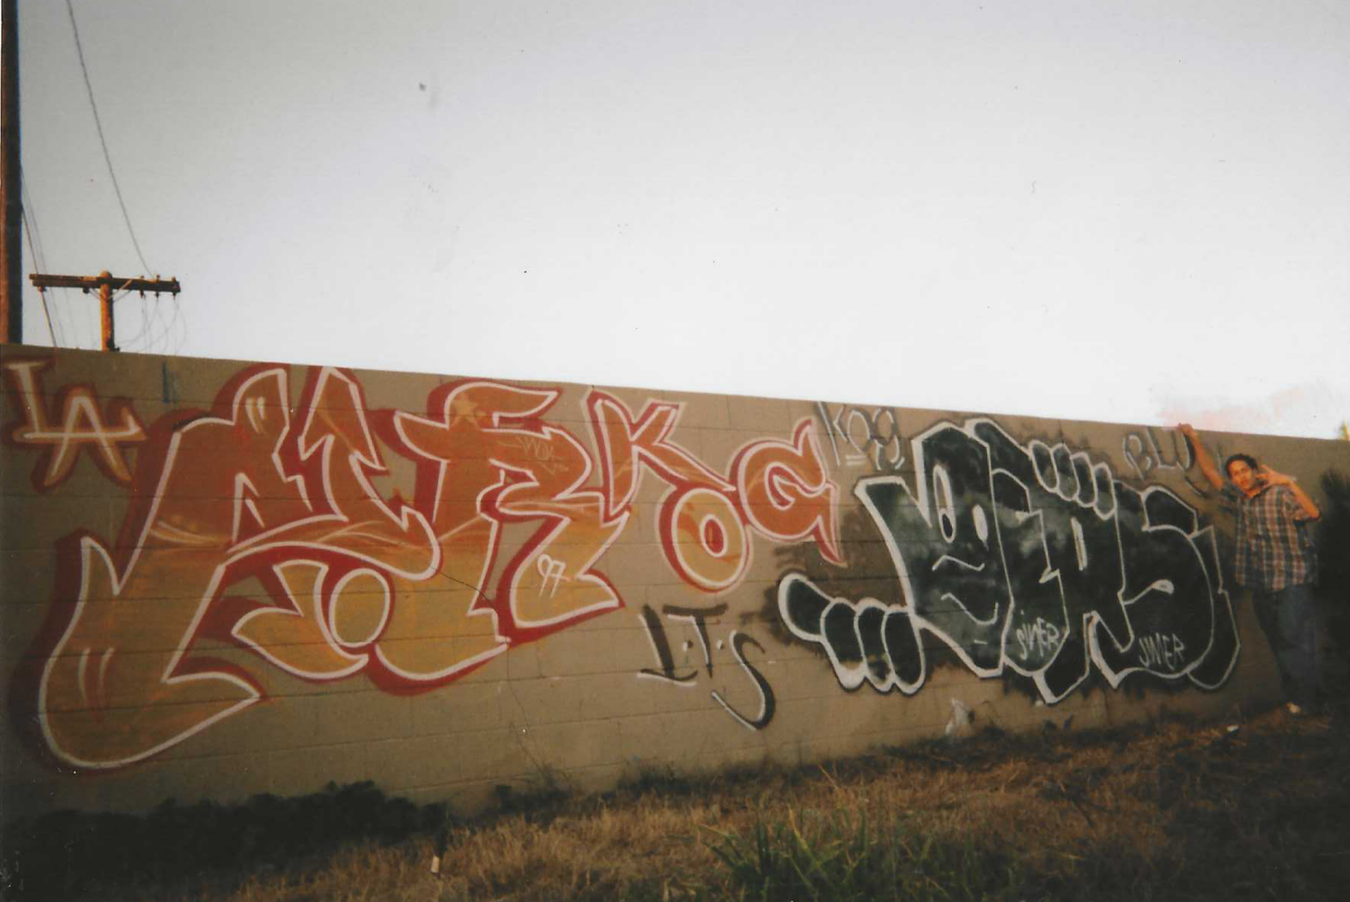 James Riley in front of a wall of graffiti in L.A. in 1997.